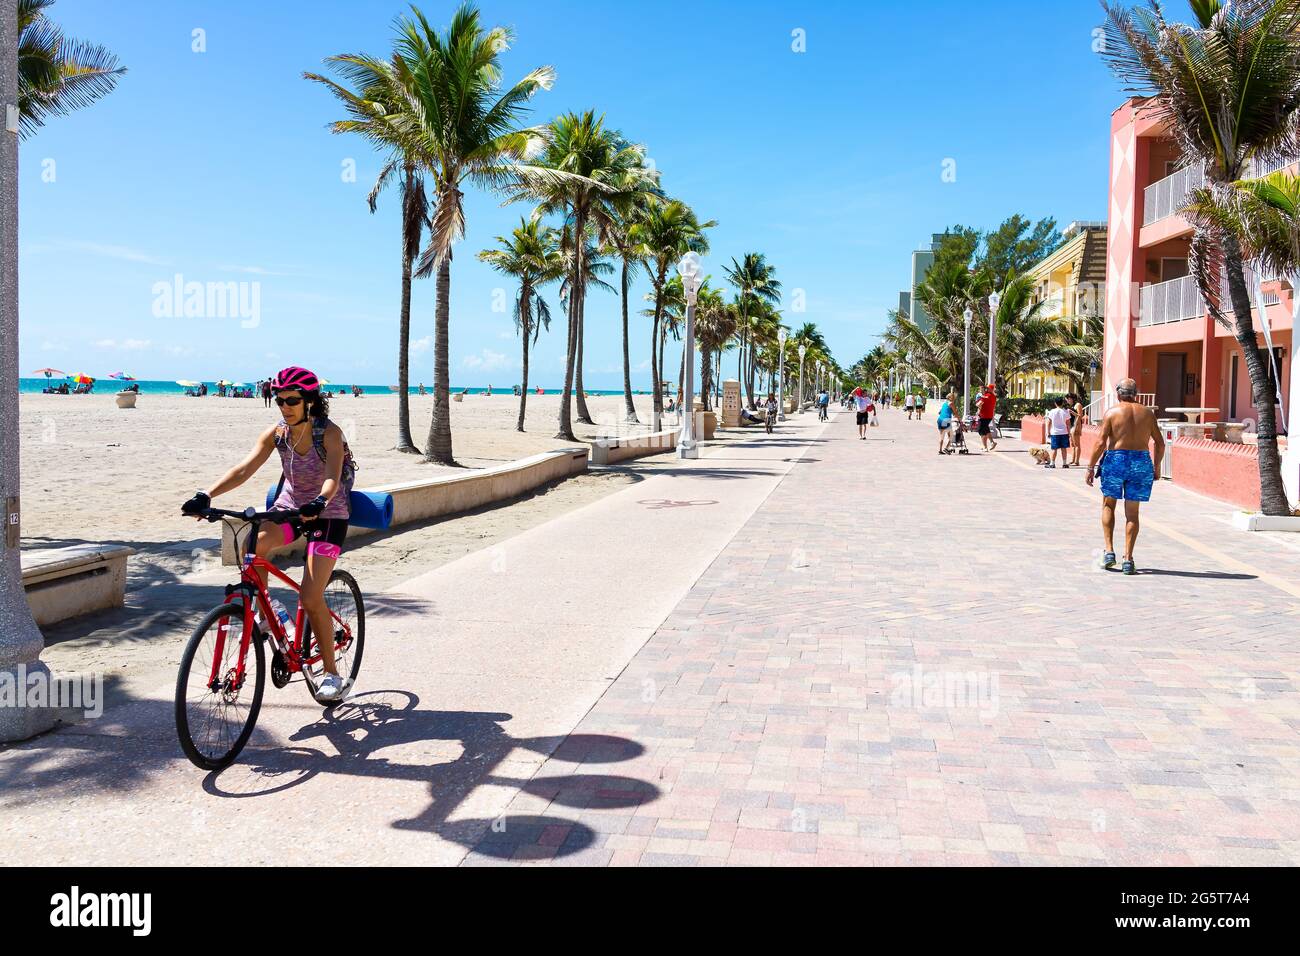 Hollywood, USA - May 6, 2018: Beach broadwalk path in Florida at sunny day and candid people riding bikes on promenade Stock Photo